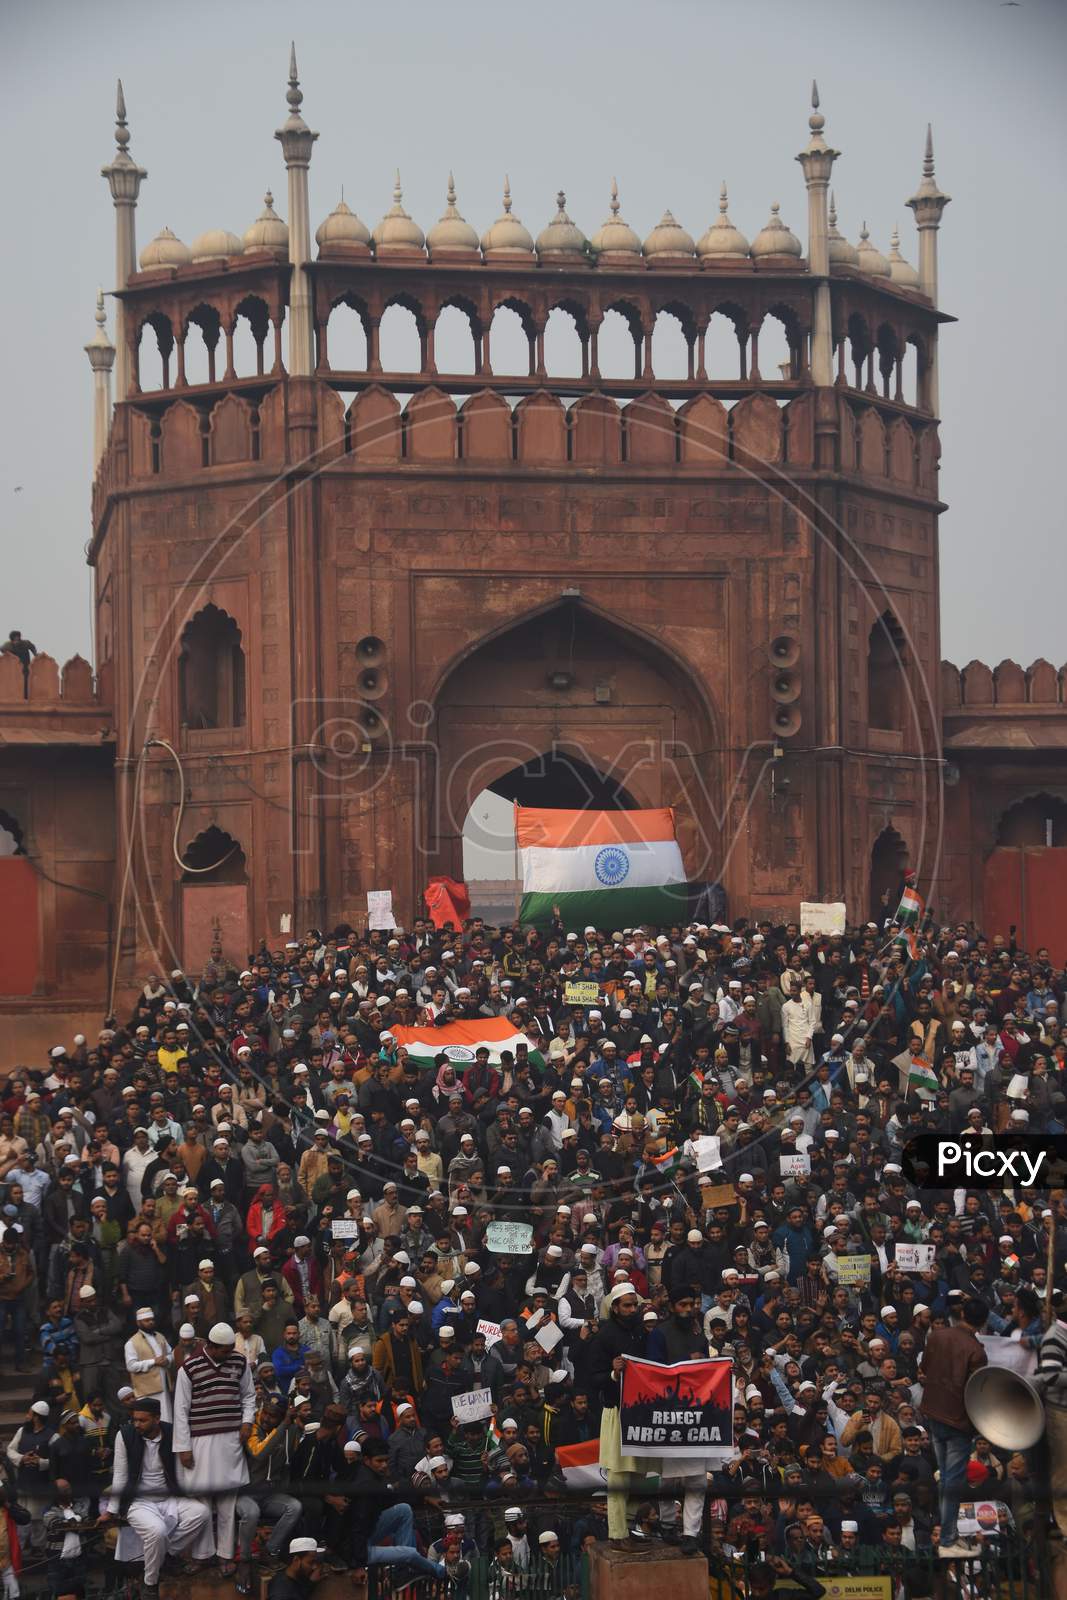 Indian Students Participating in an Protest Against CAA, CAB, NPR  and NRC Amendment Bill At Jama Masjidh in Delhi